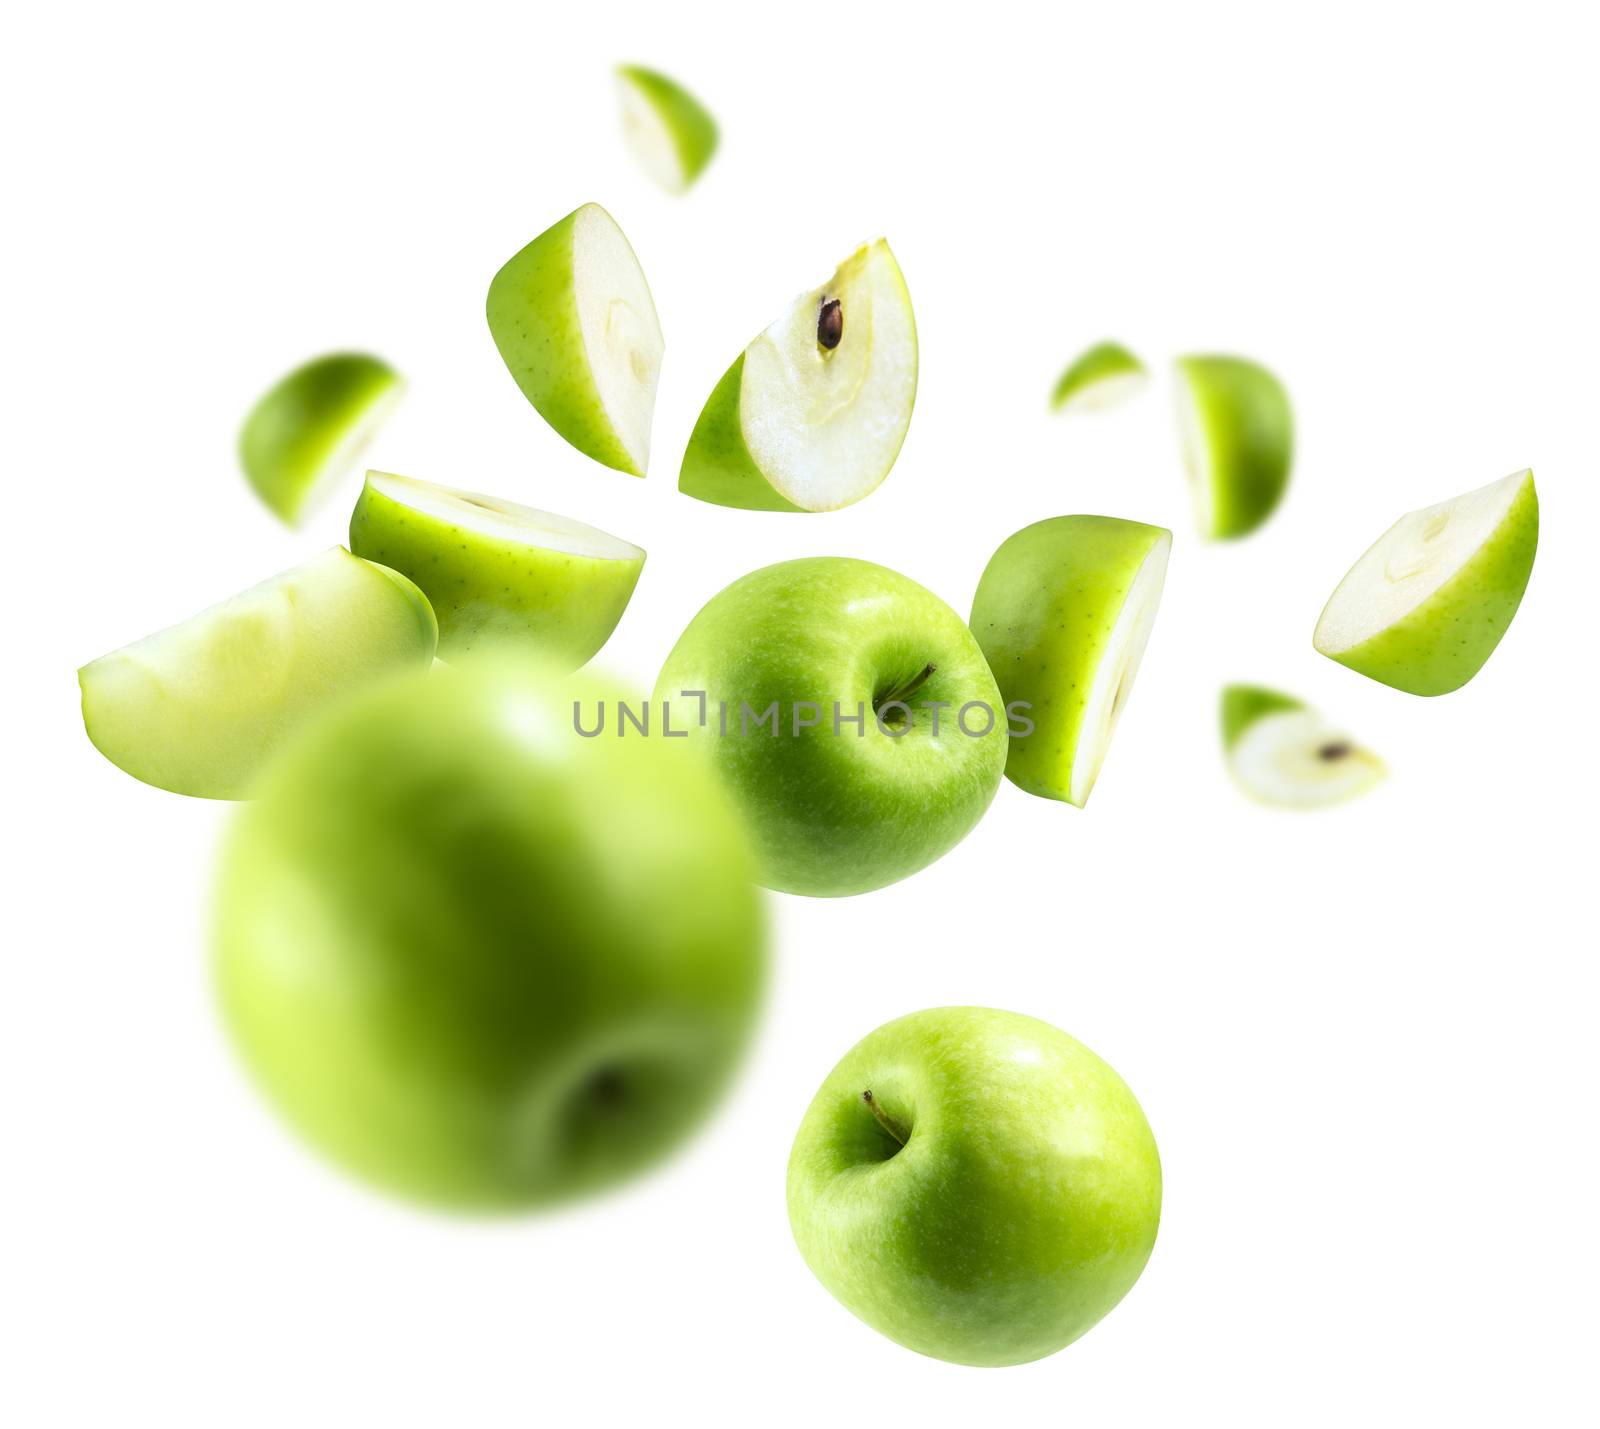 A group of green apples levitating on a white background by butenkow